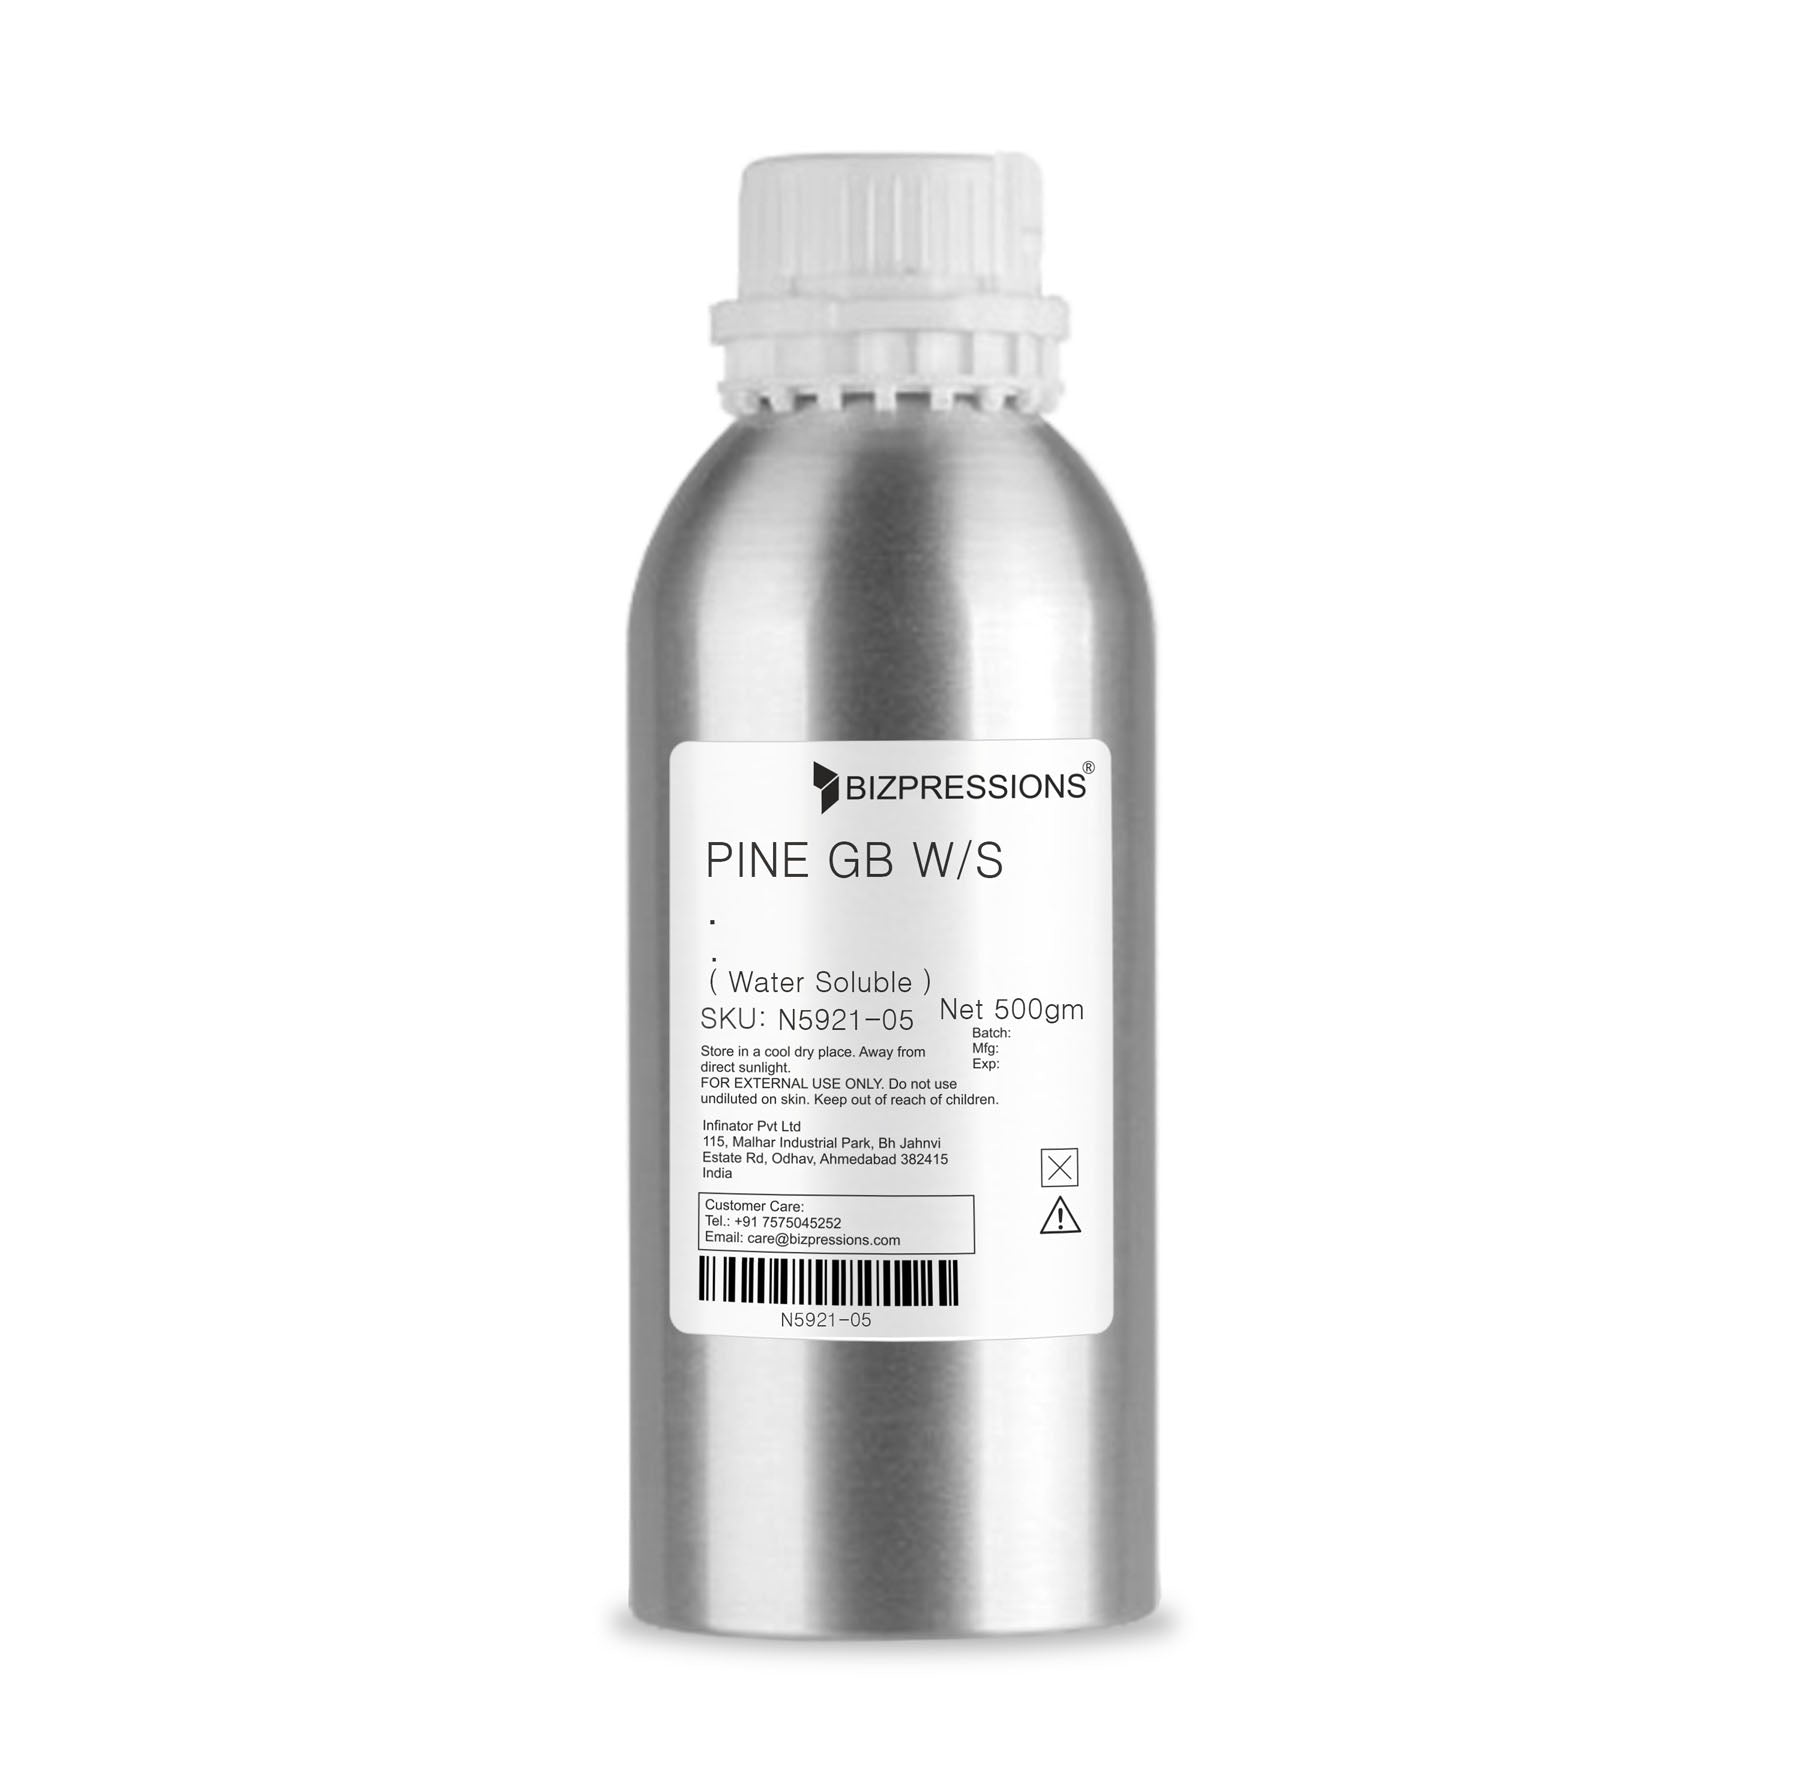 PINE GB W/S - Fragrance ( Water Soluble ) - 500 gm